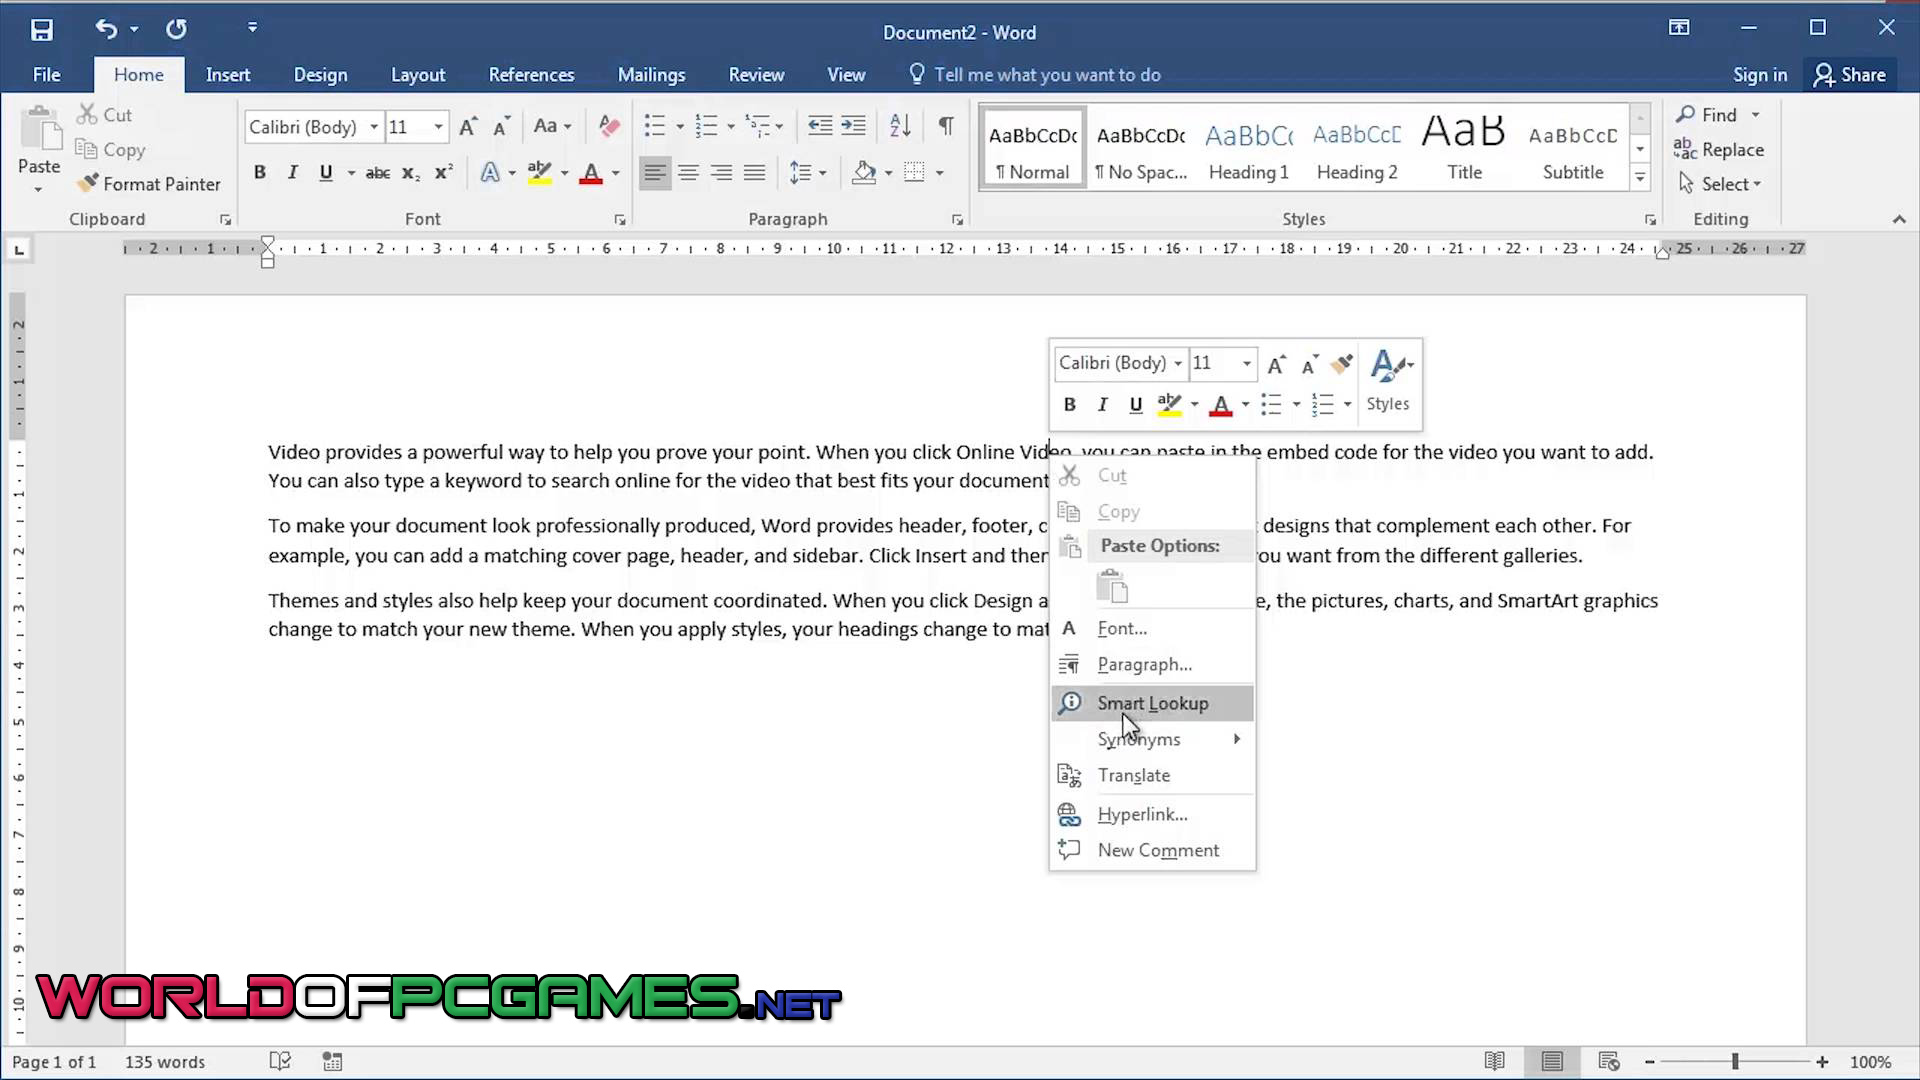 download microsoft project for mac os x